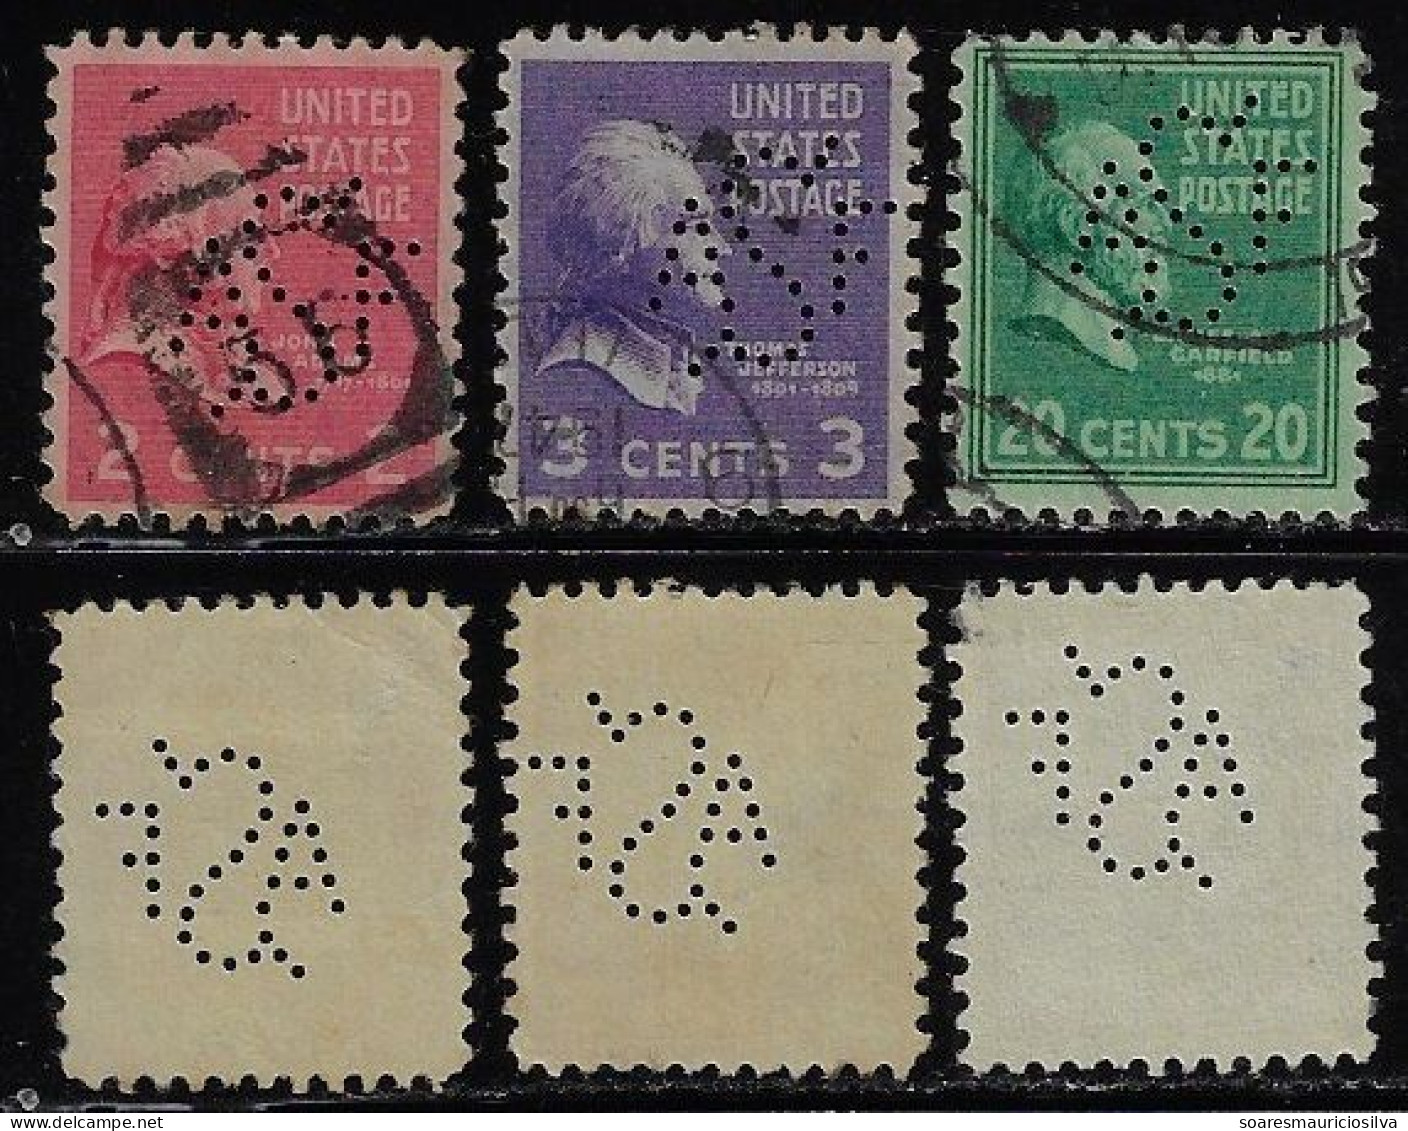 USA United States 1918/1942 3 Stamp With Perfin ASF By American Steel Foundries From Chicago Lochung Perfore - Perforés